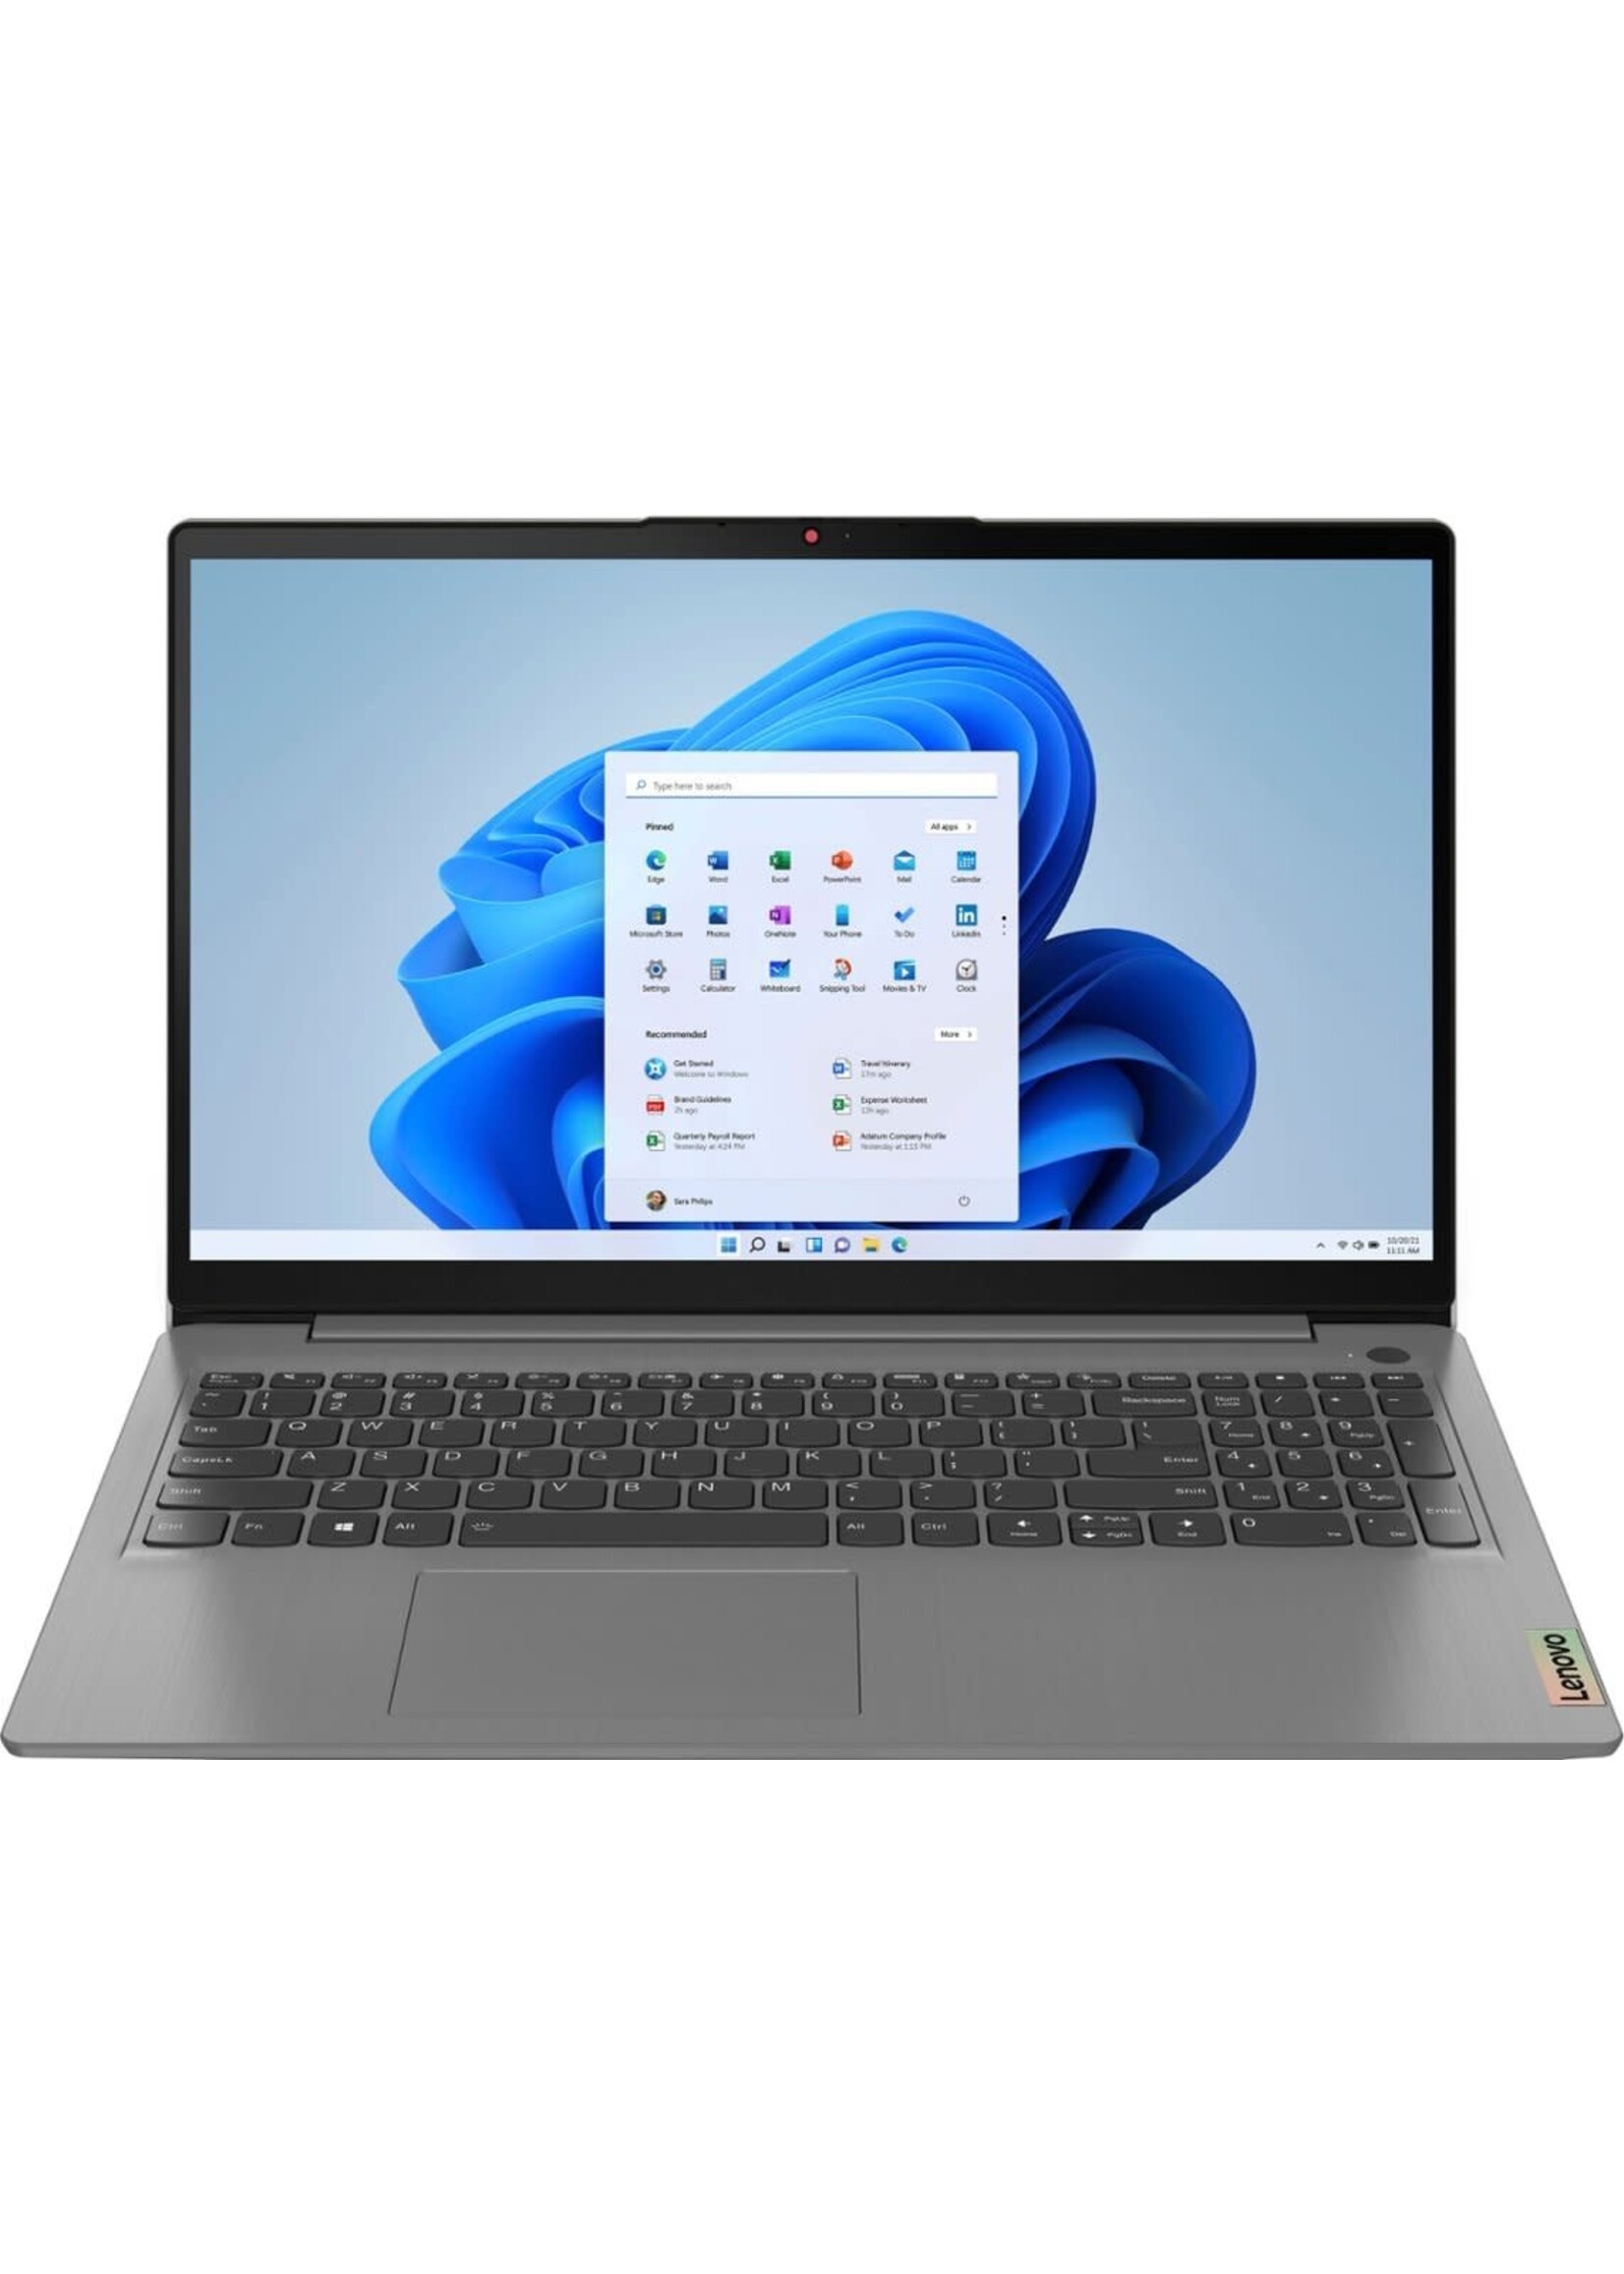 Lenovo Ideapad 3i 15.6" FHD Touch Laptop - Core i3-1115G4 with 8GB Memory - 256GB SSD - Arctic Grey